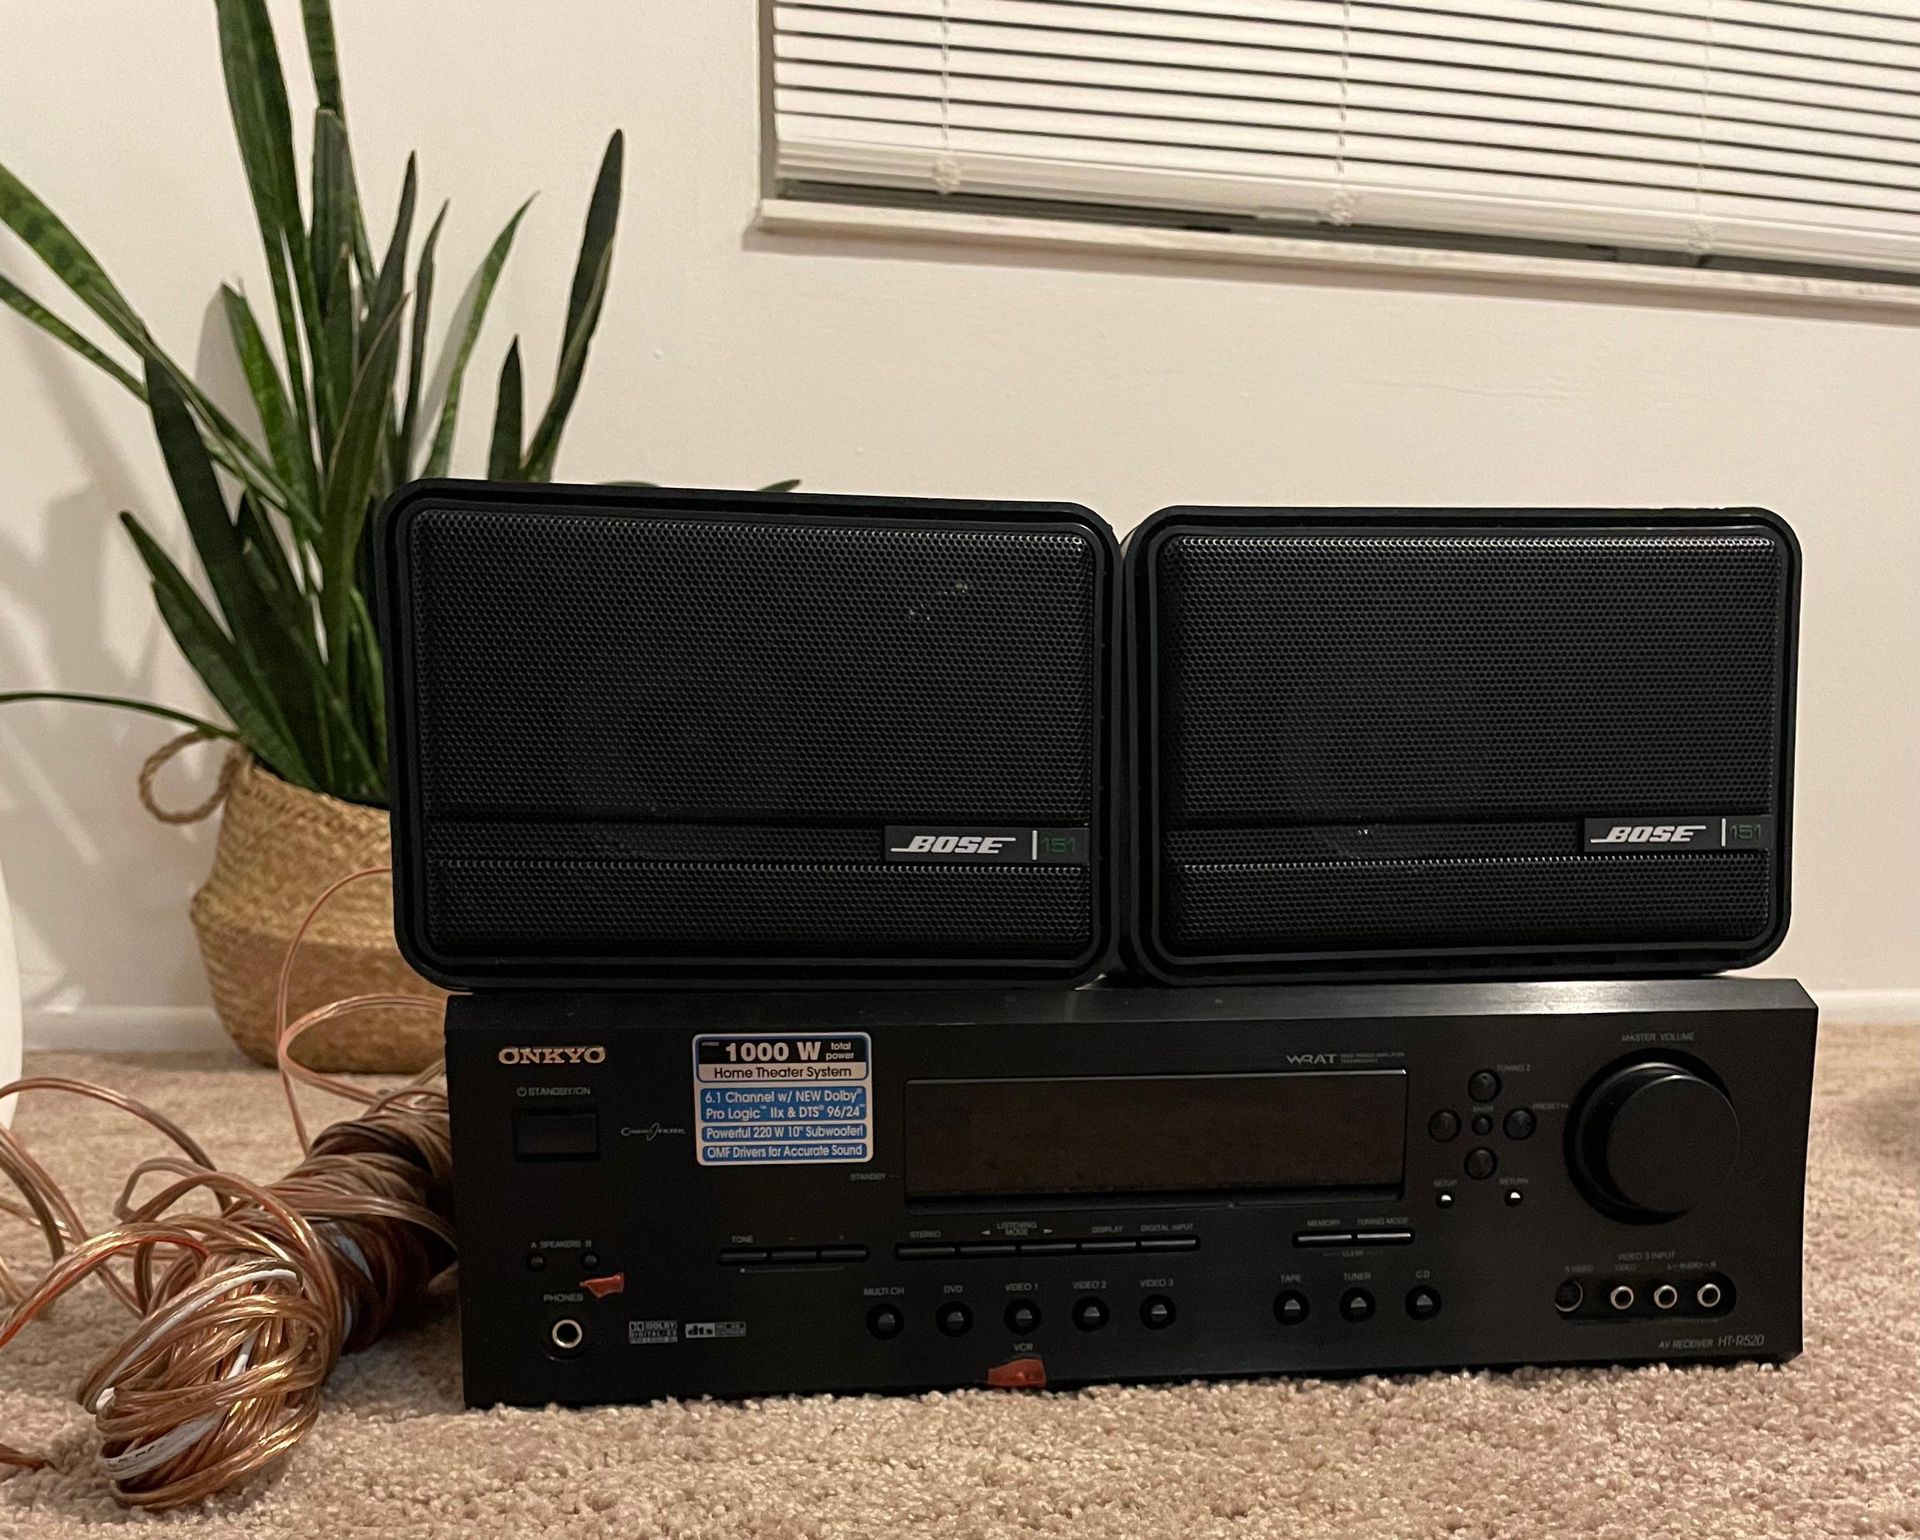 Bose Speakers/ Home Theater System